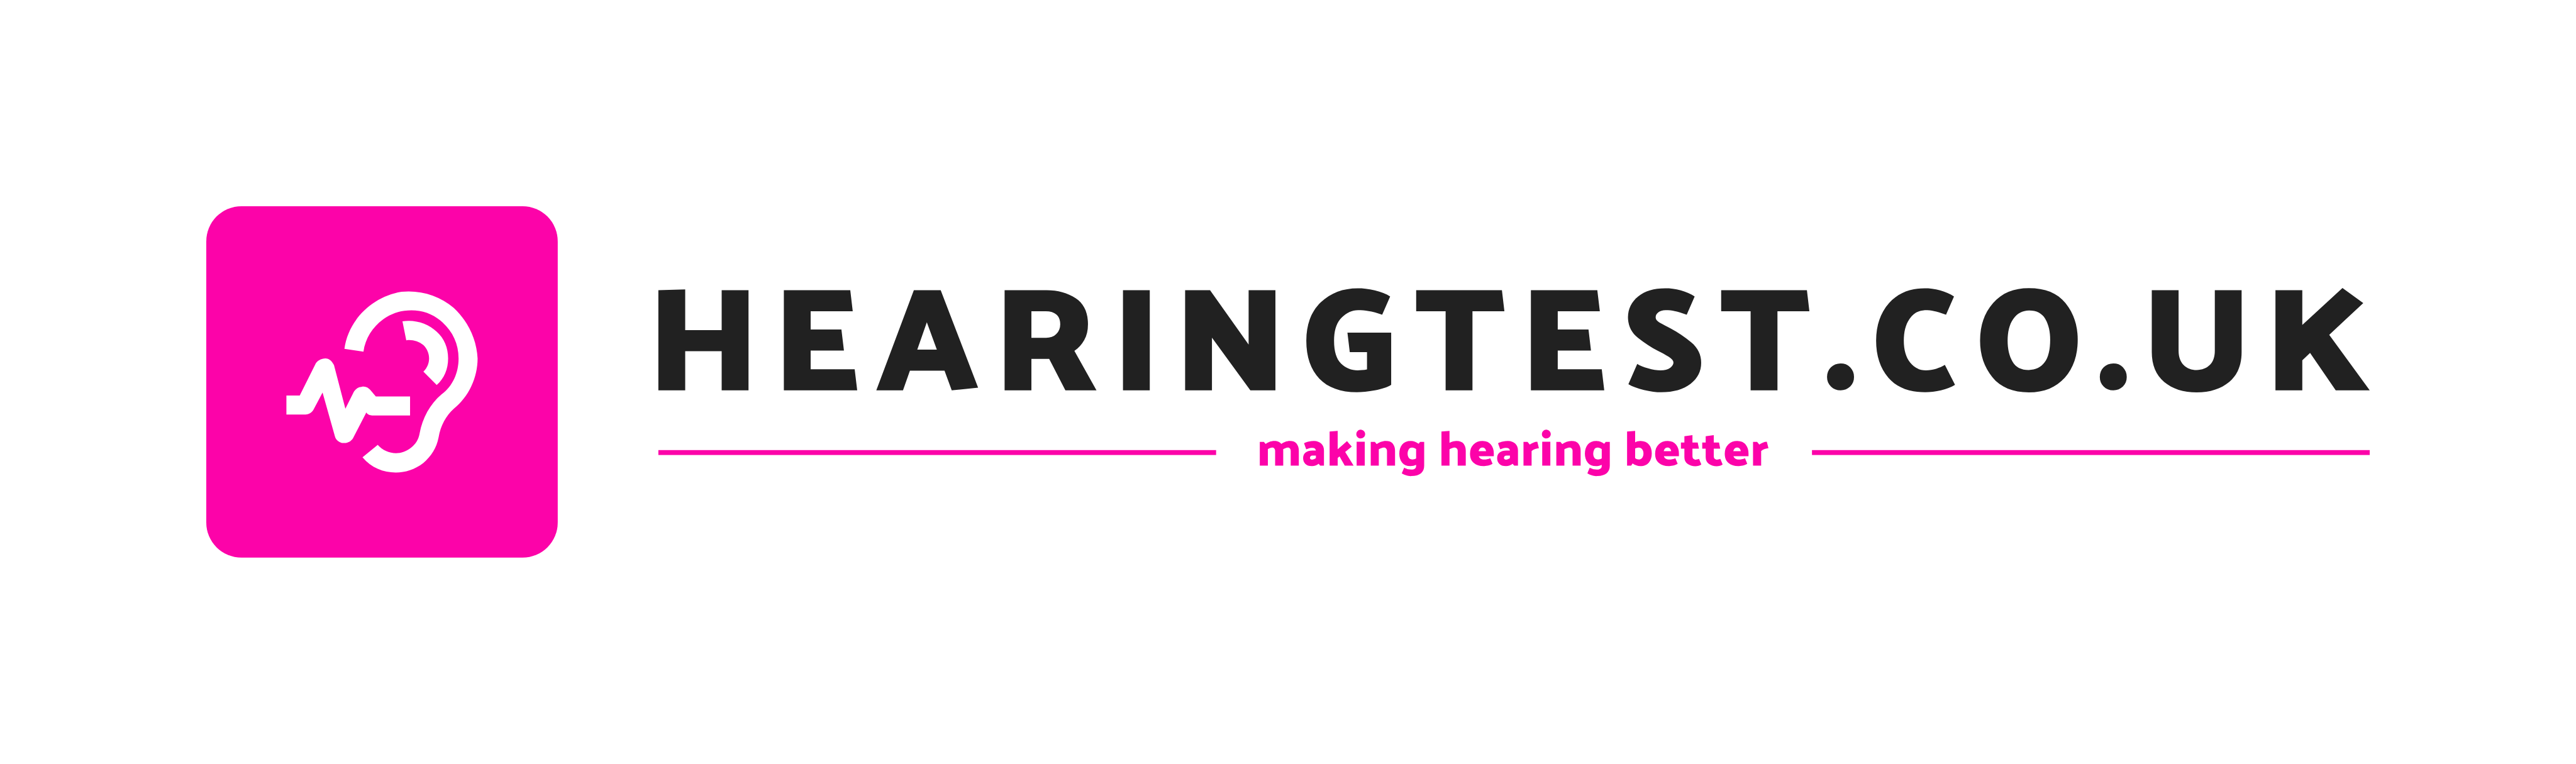 Free Hearing Test for Adults in Llanbister Road | Hearingtest.co.uk